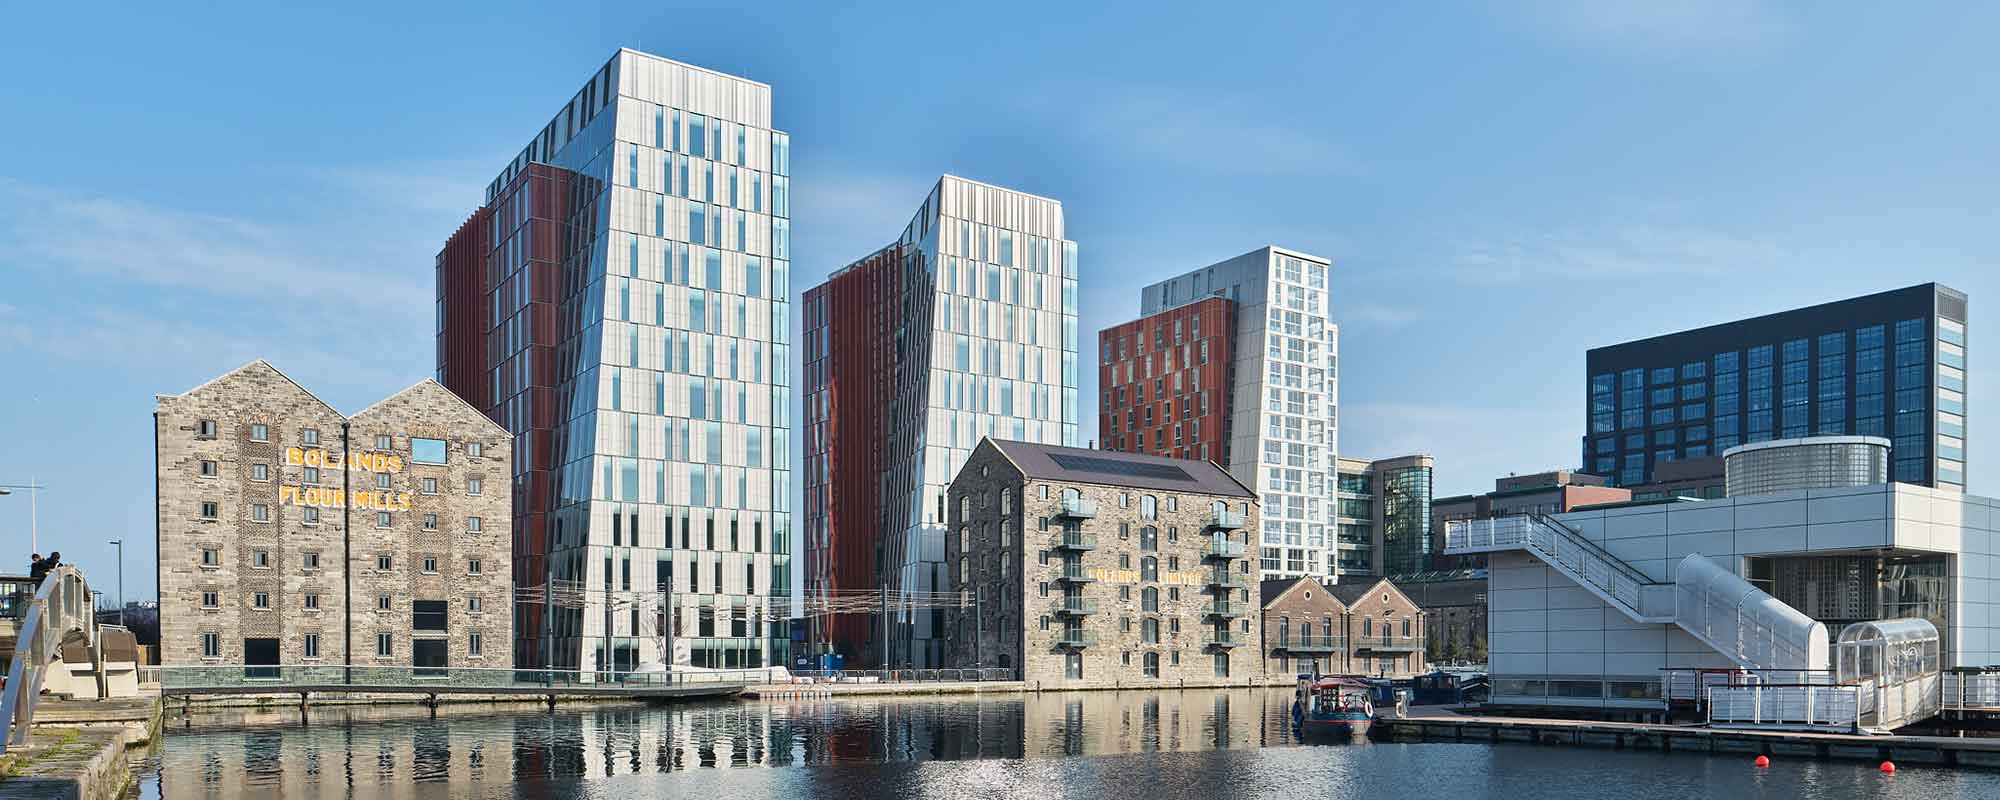 View of restored buildings and three new towers at Bolands Quay, with the grand canal in the foreground.